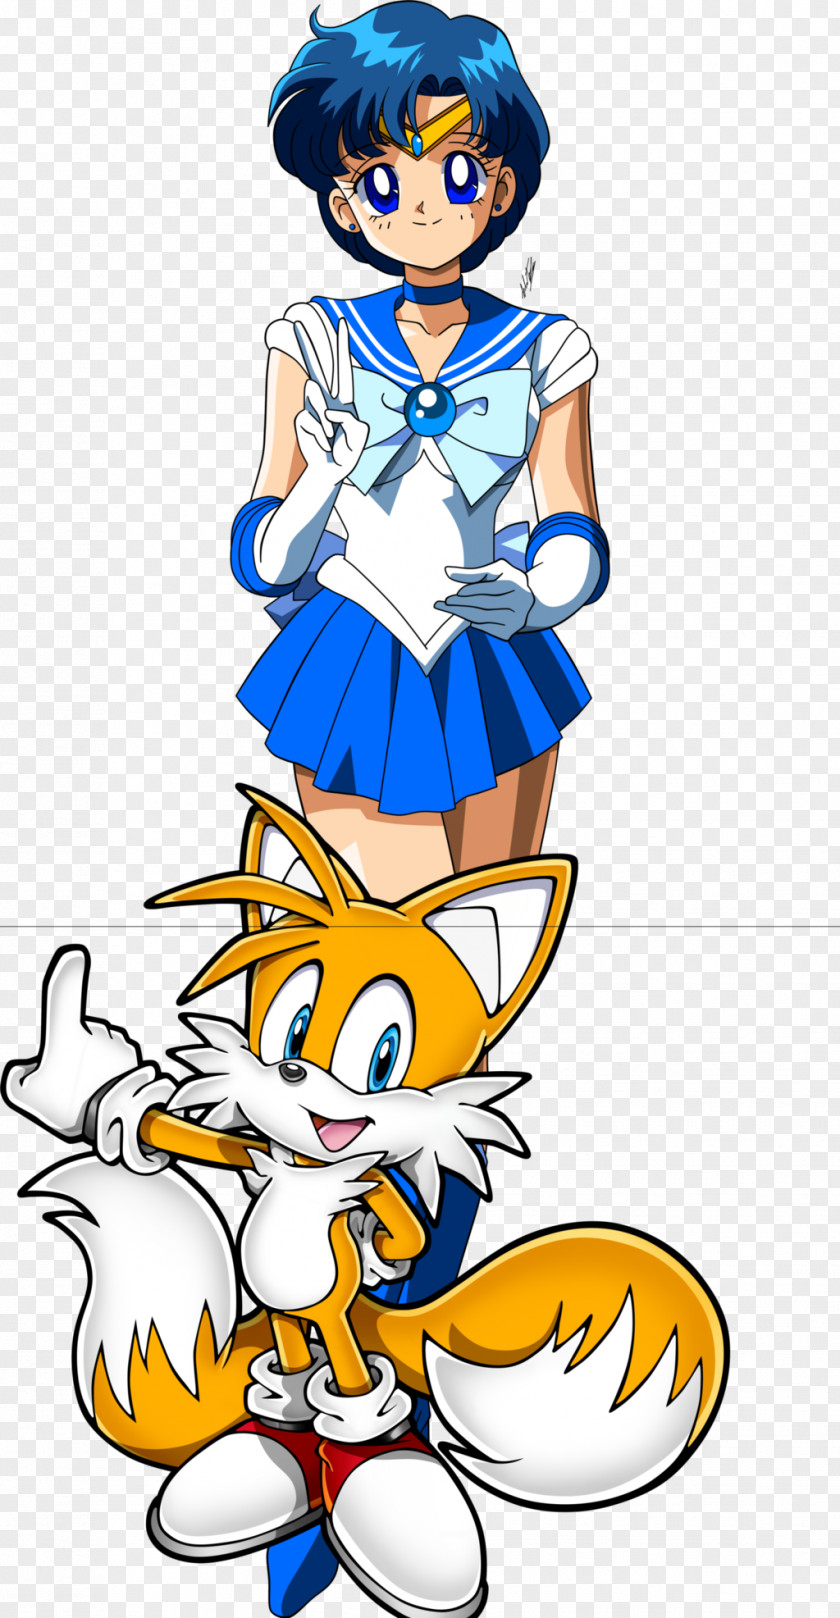 Tails Sailor Mercury Video Game Character Sonic The Hedgehog PNG